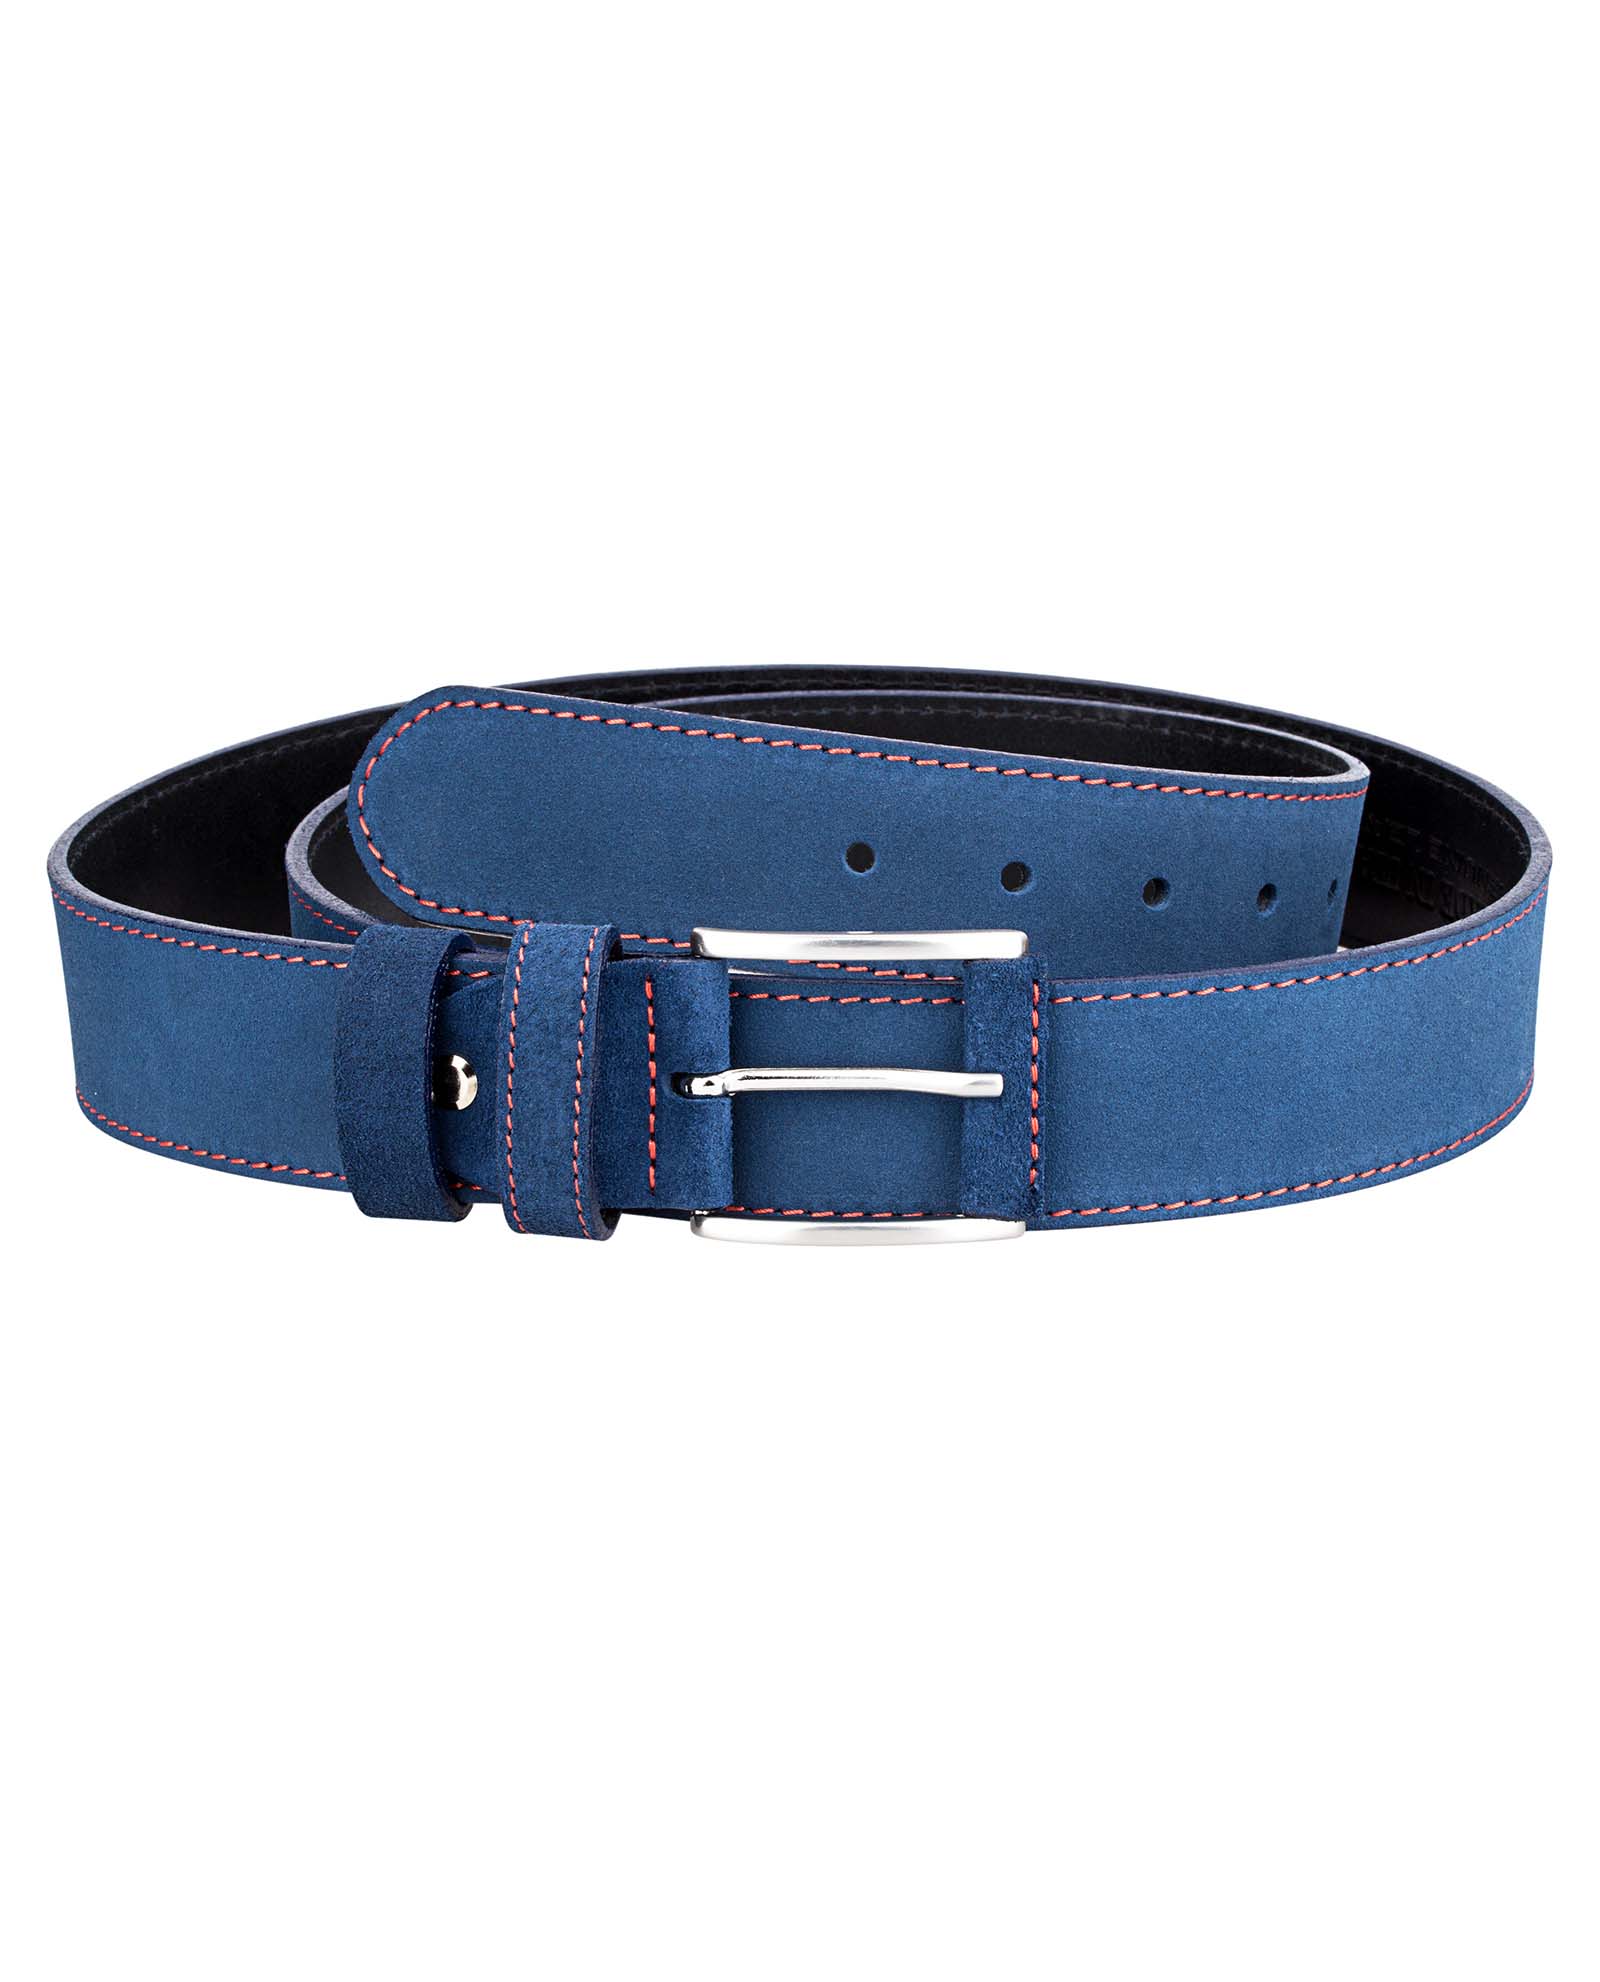 Buy Blue Suede Belt - Thick & Wide Leather - Free Shipping